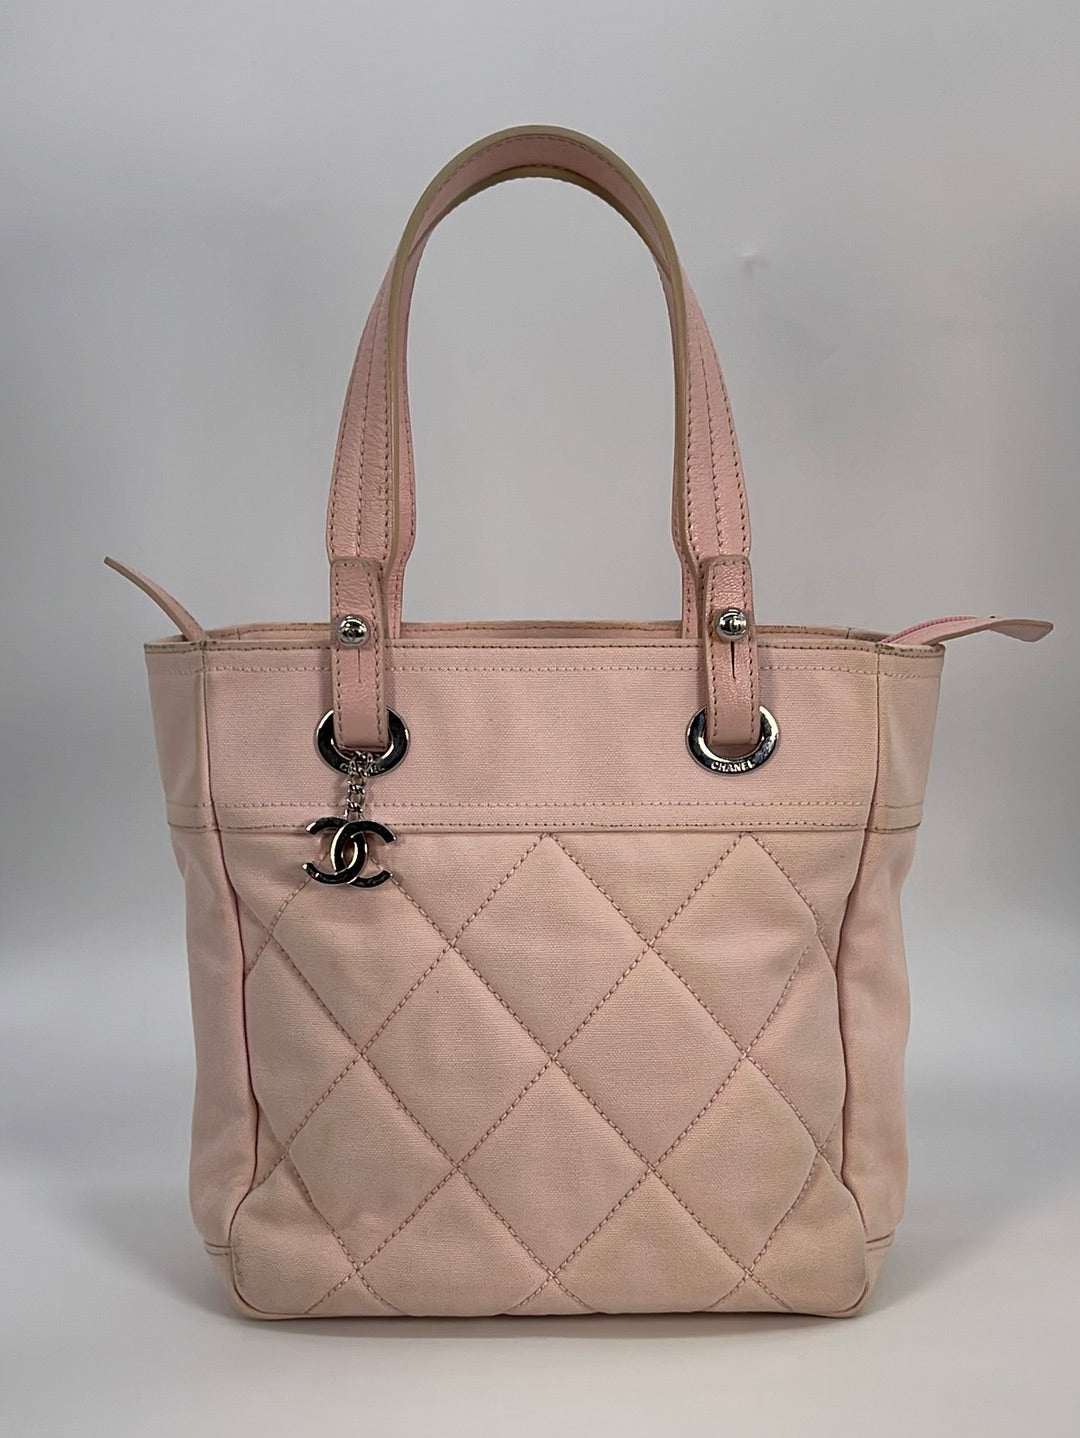 Preloved Chanel Pink Quilted Canvas Biarritz Soft Tote 12586392